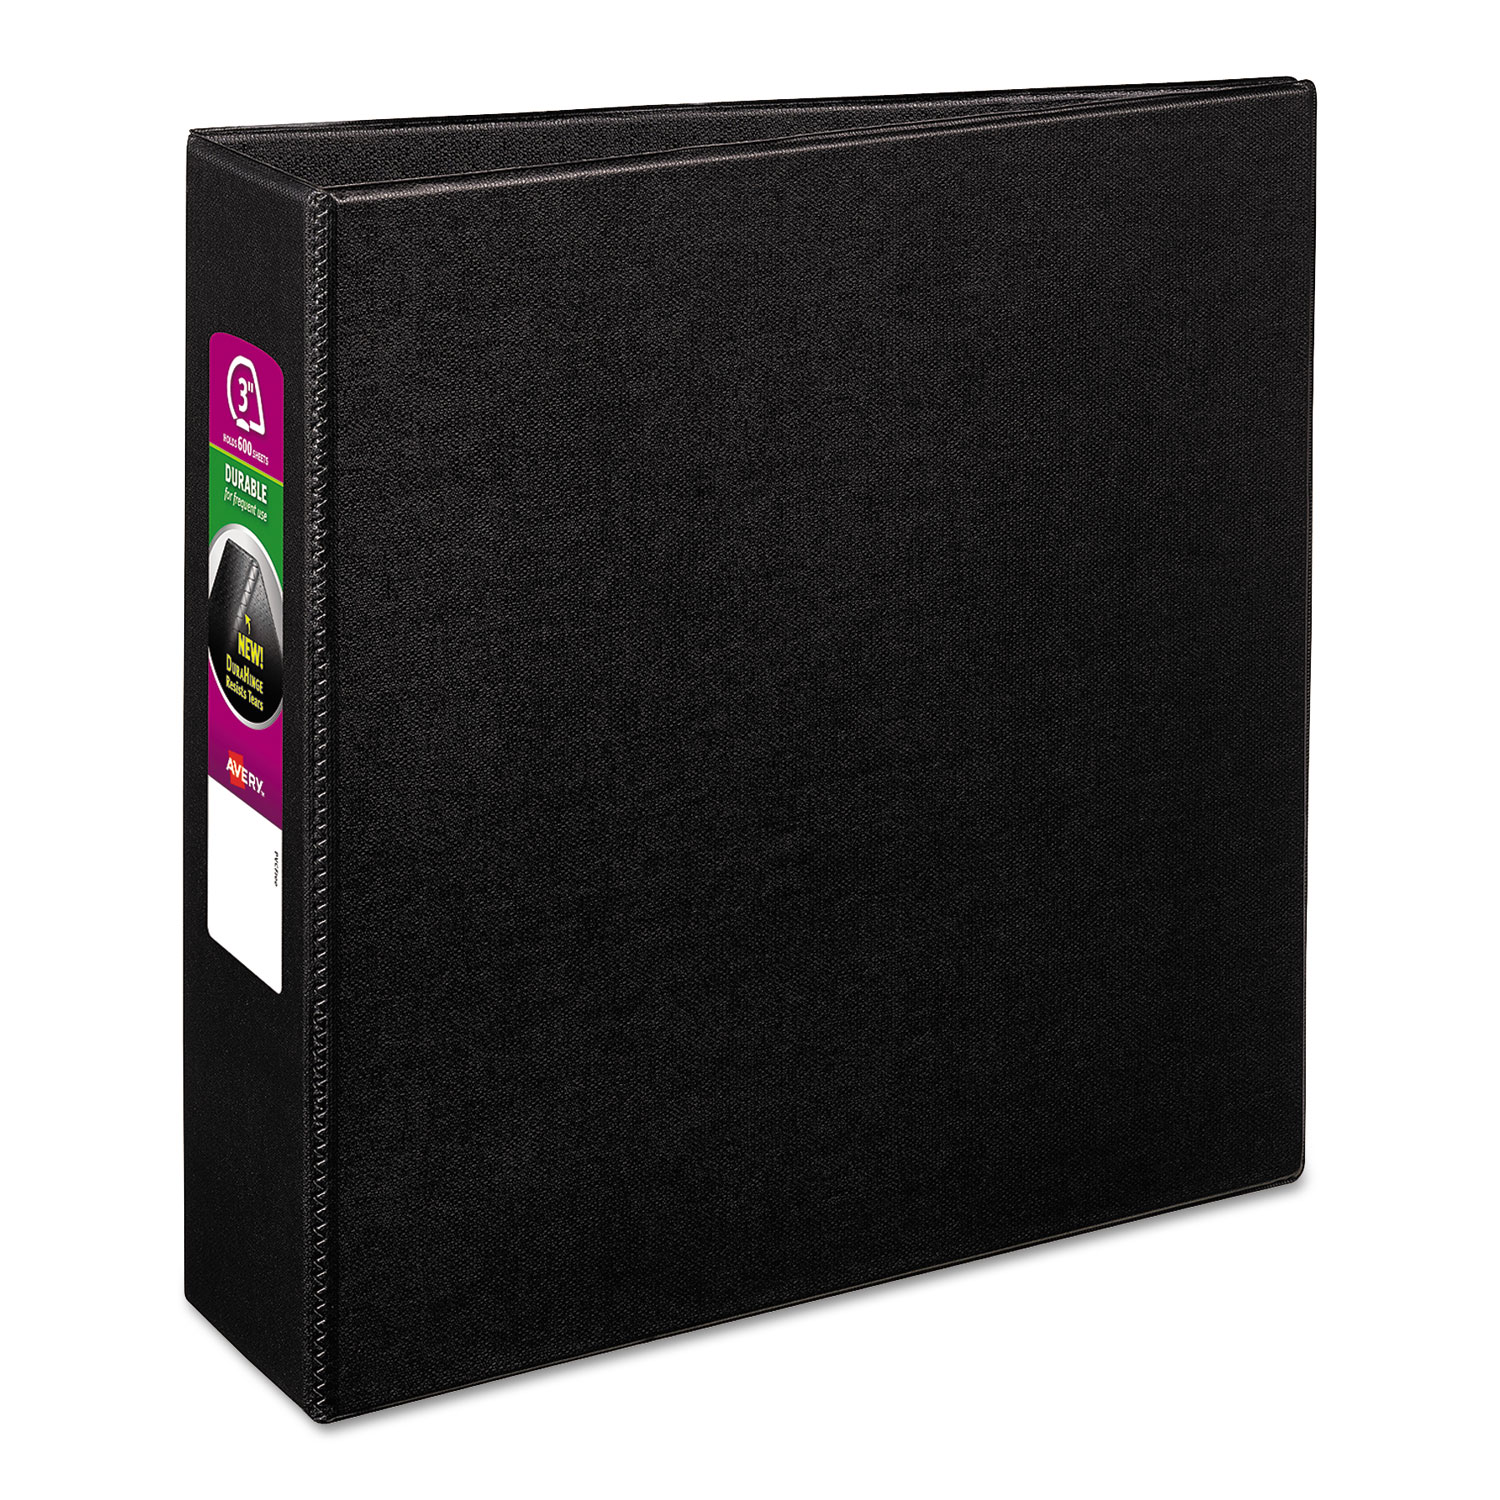  Avery 27650 Durable Non-View Binder with DuraHinge and Slant Rings, 3 Rings, 3 Capacity, 11 x 8.5, Black (AVE27650) 